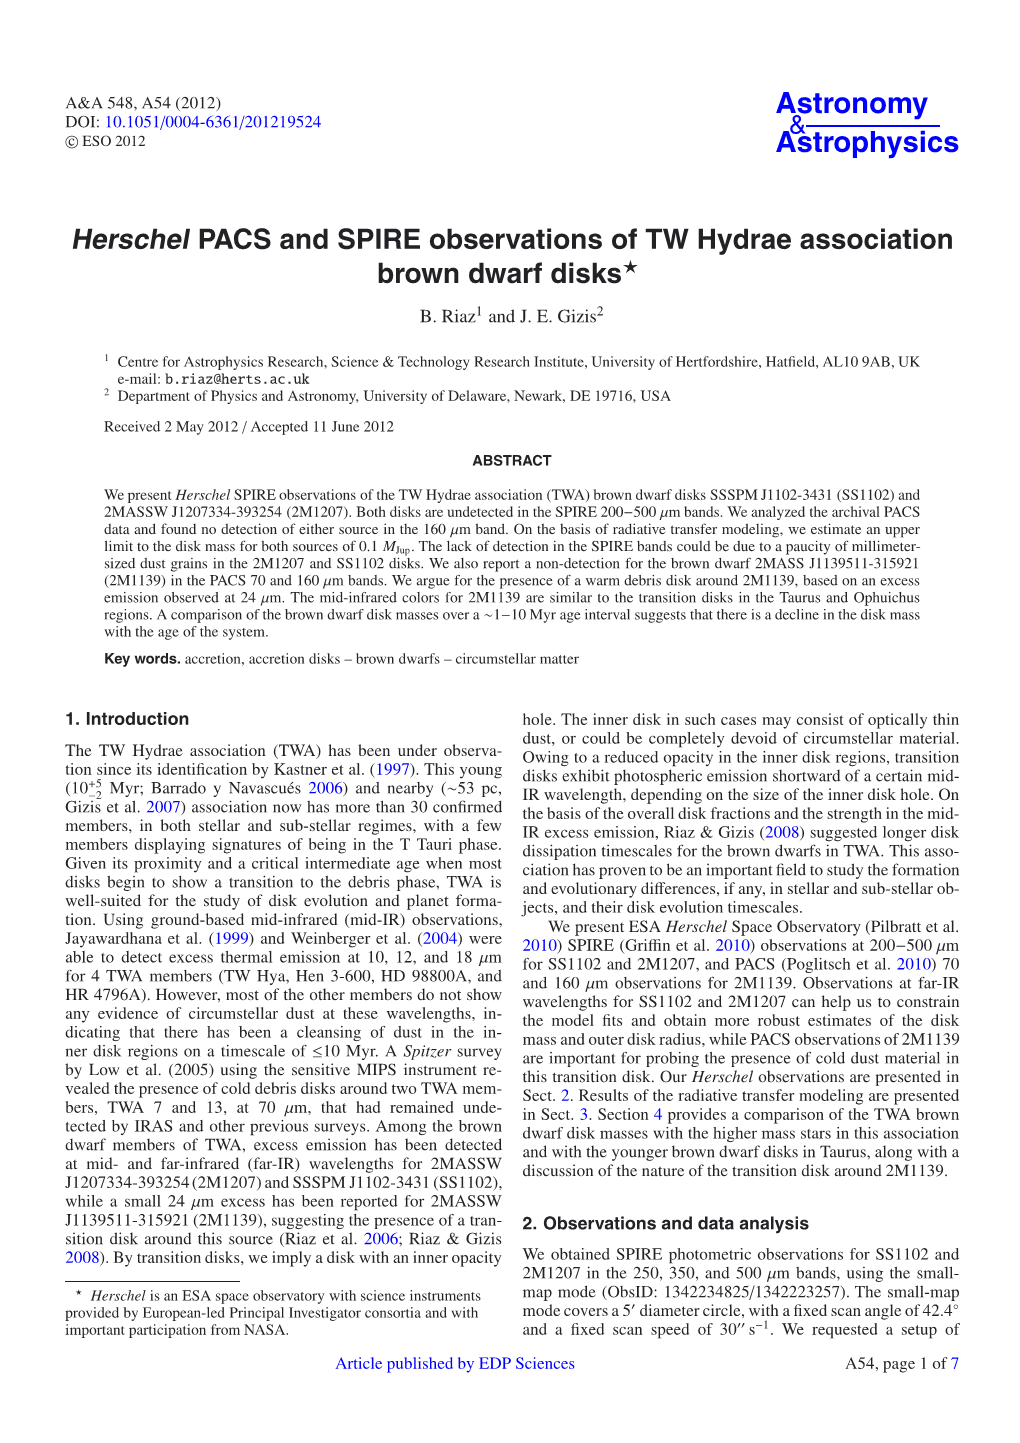 Herschel PACS and SPIRE Observations of TW Hydrae Association Brown Dwarf Disks